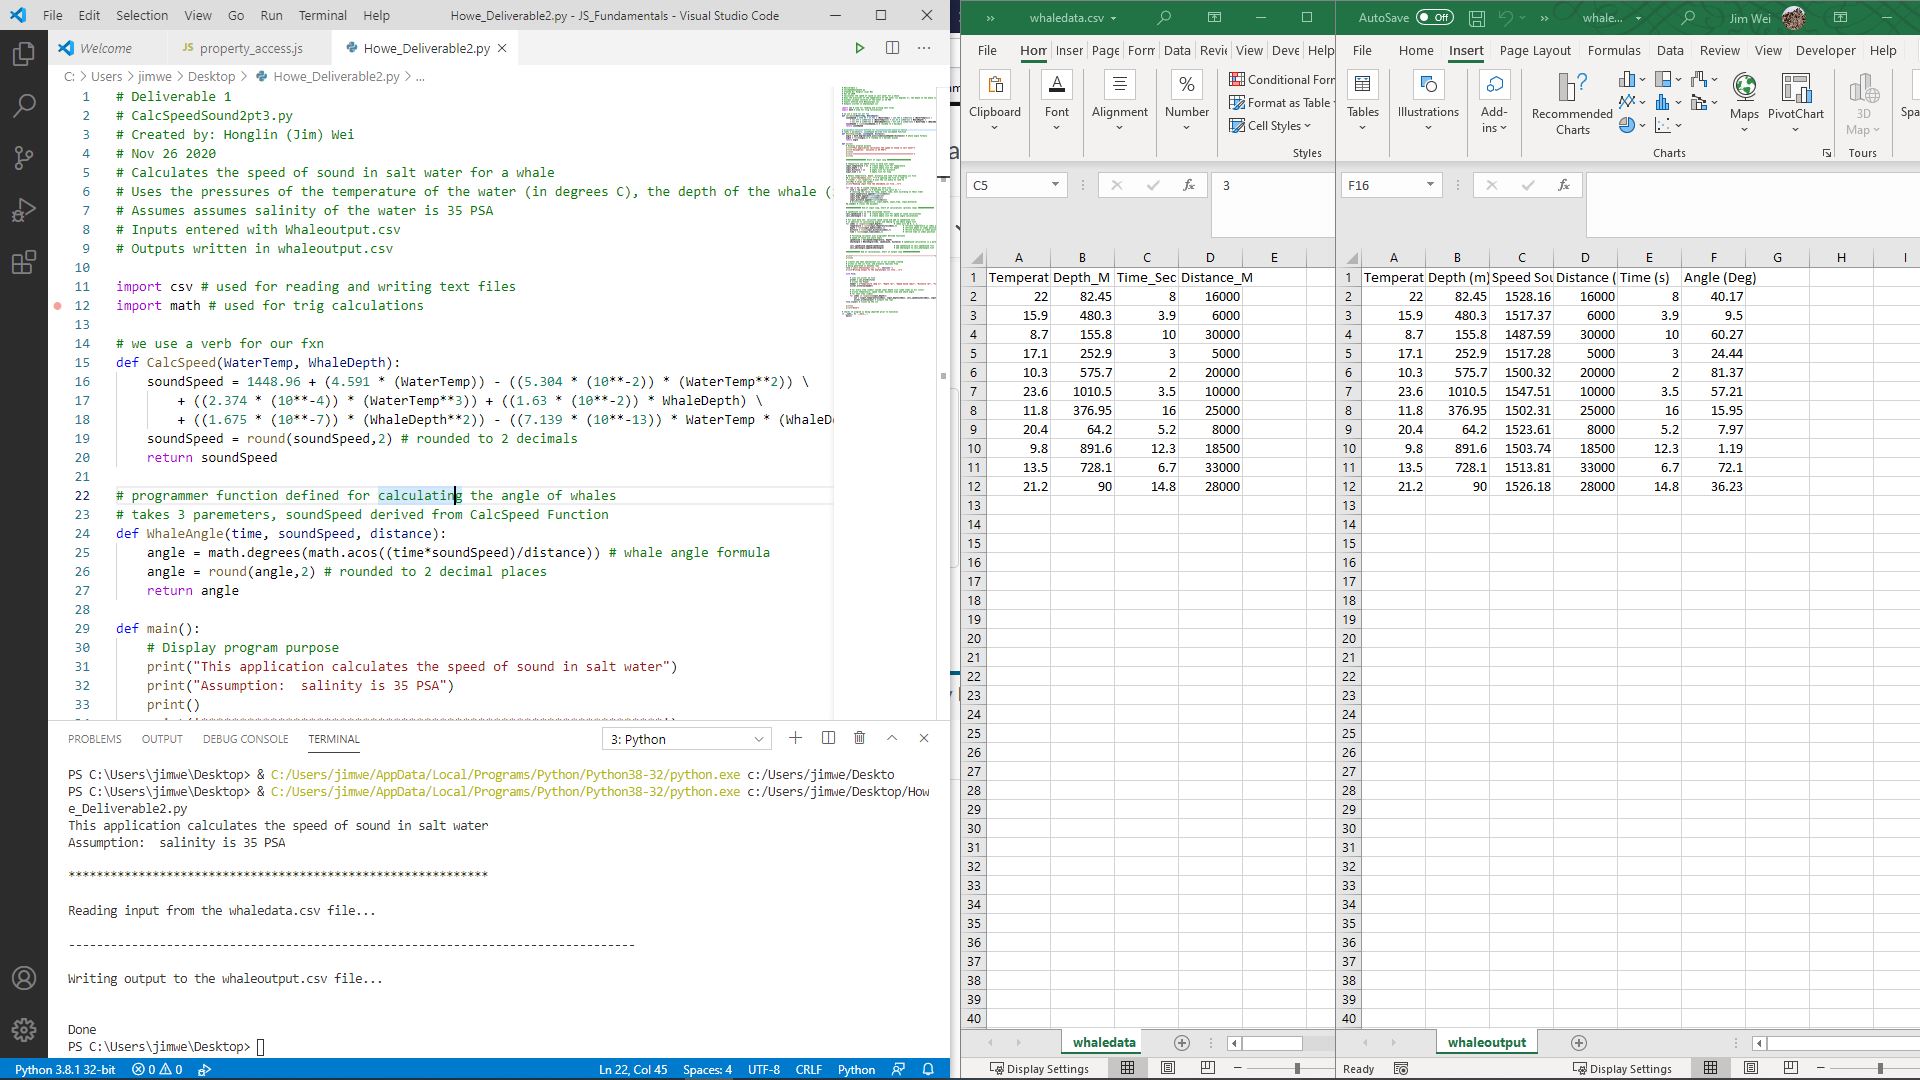 Calculating then angle of whale location using CSV entries and Python.